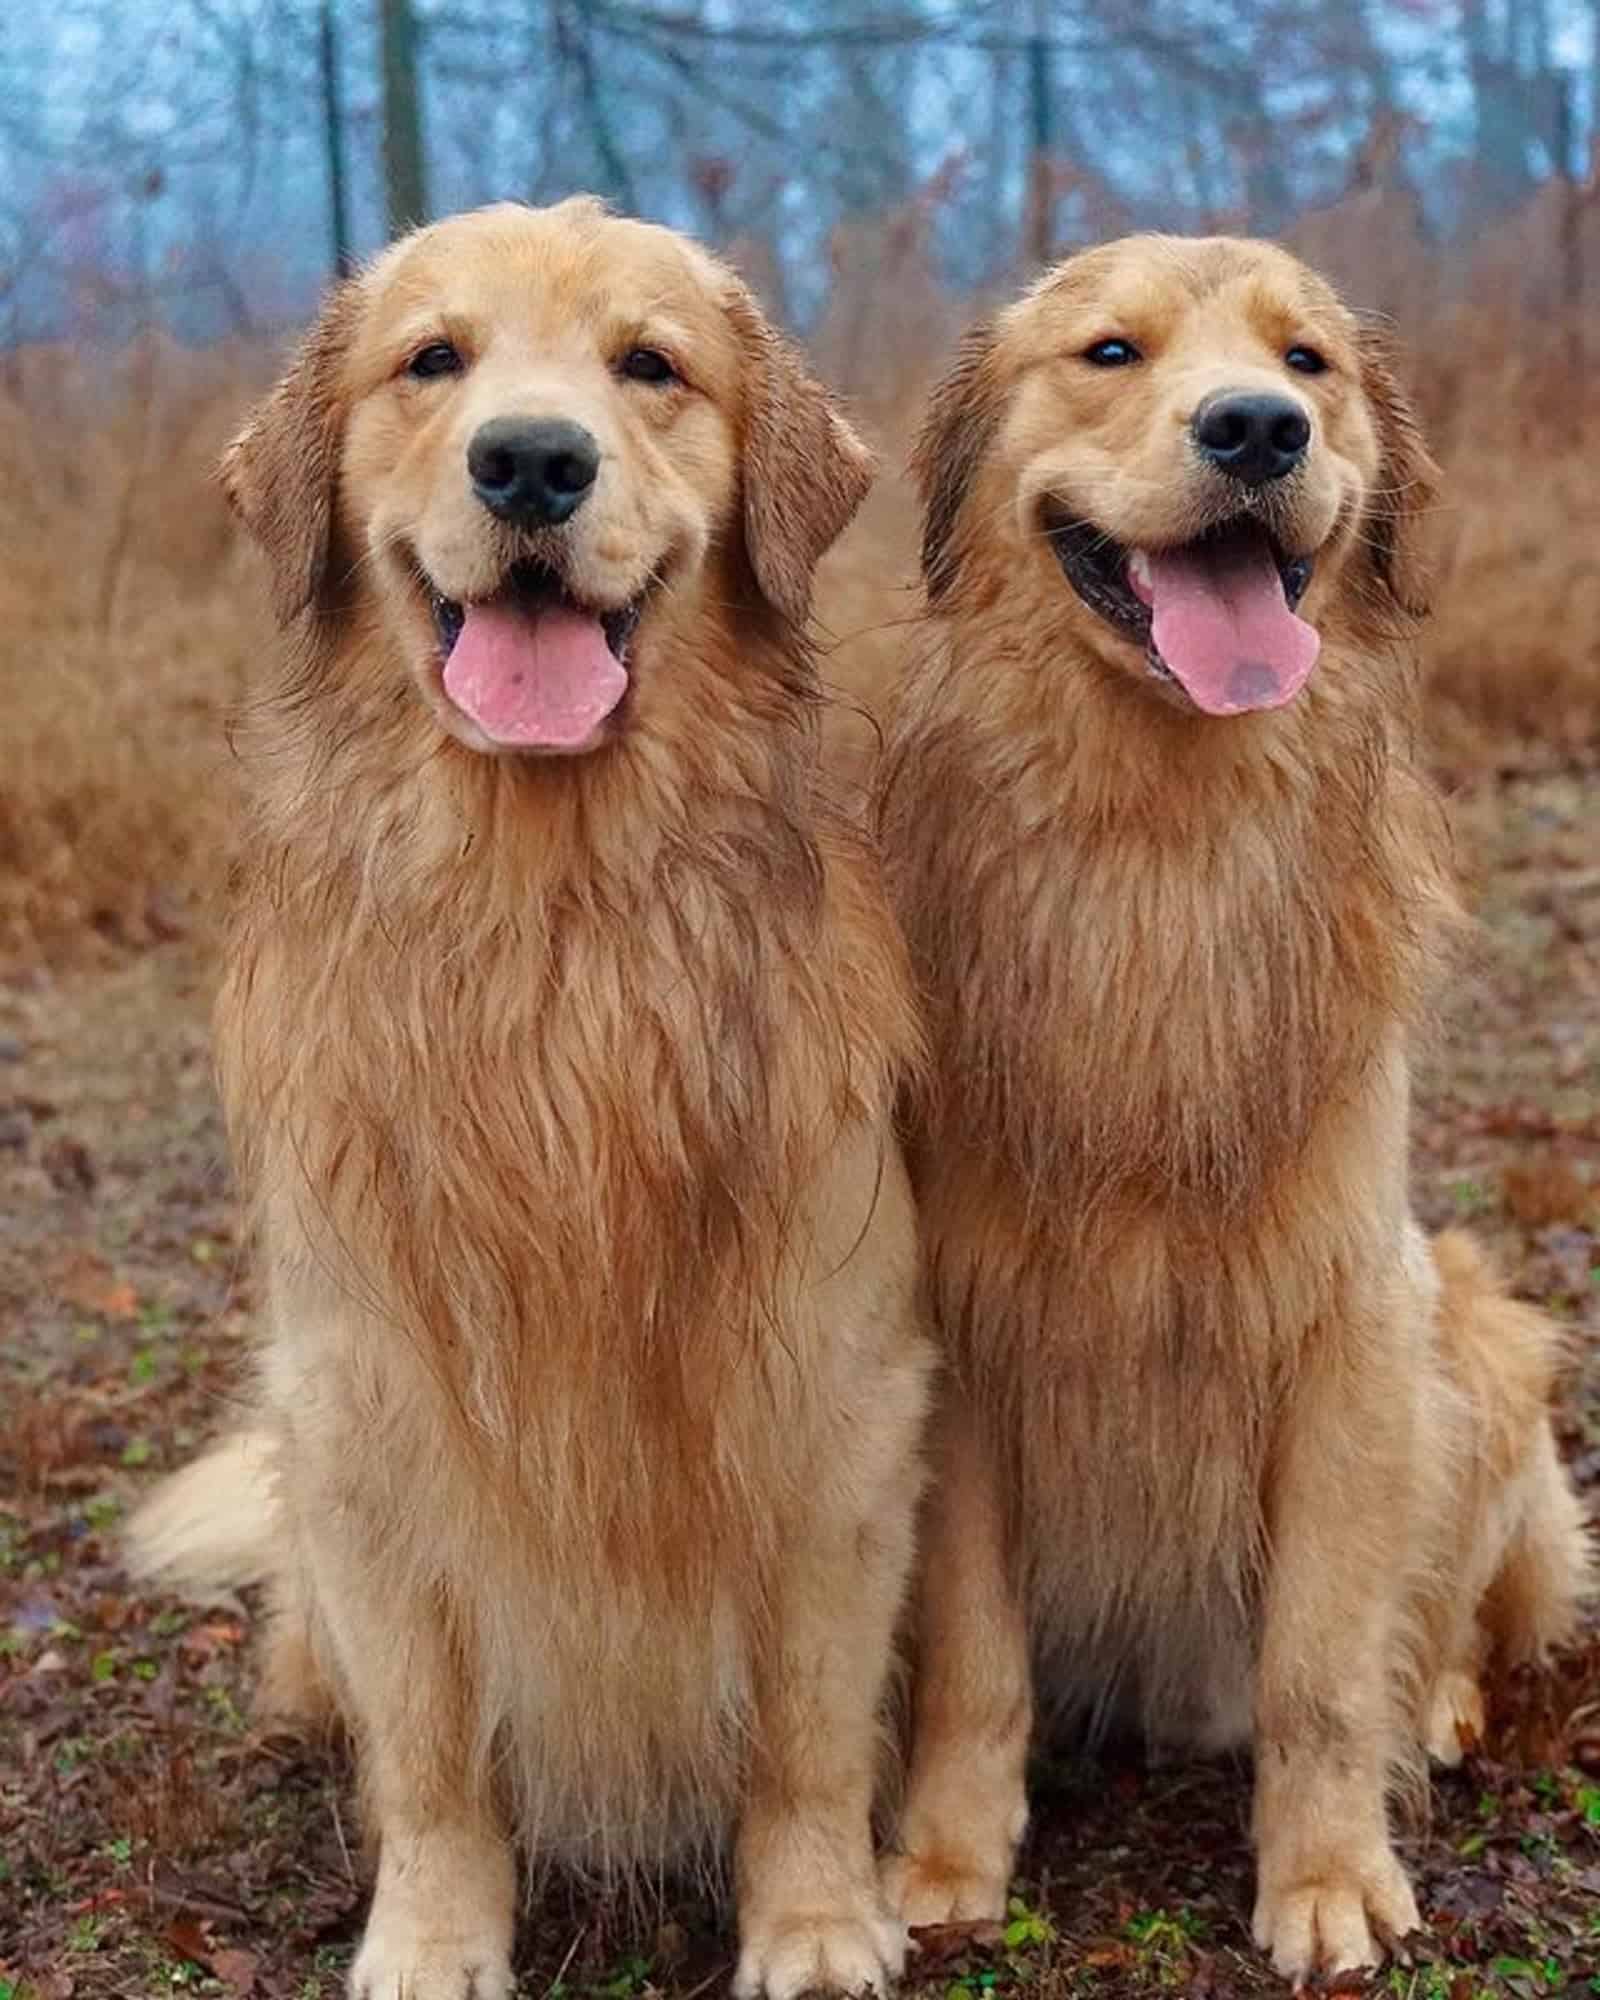 two adorable golden retrievers sitting on the ground